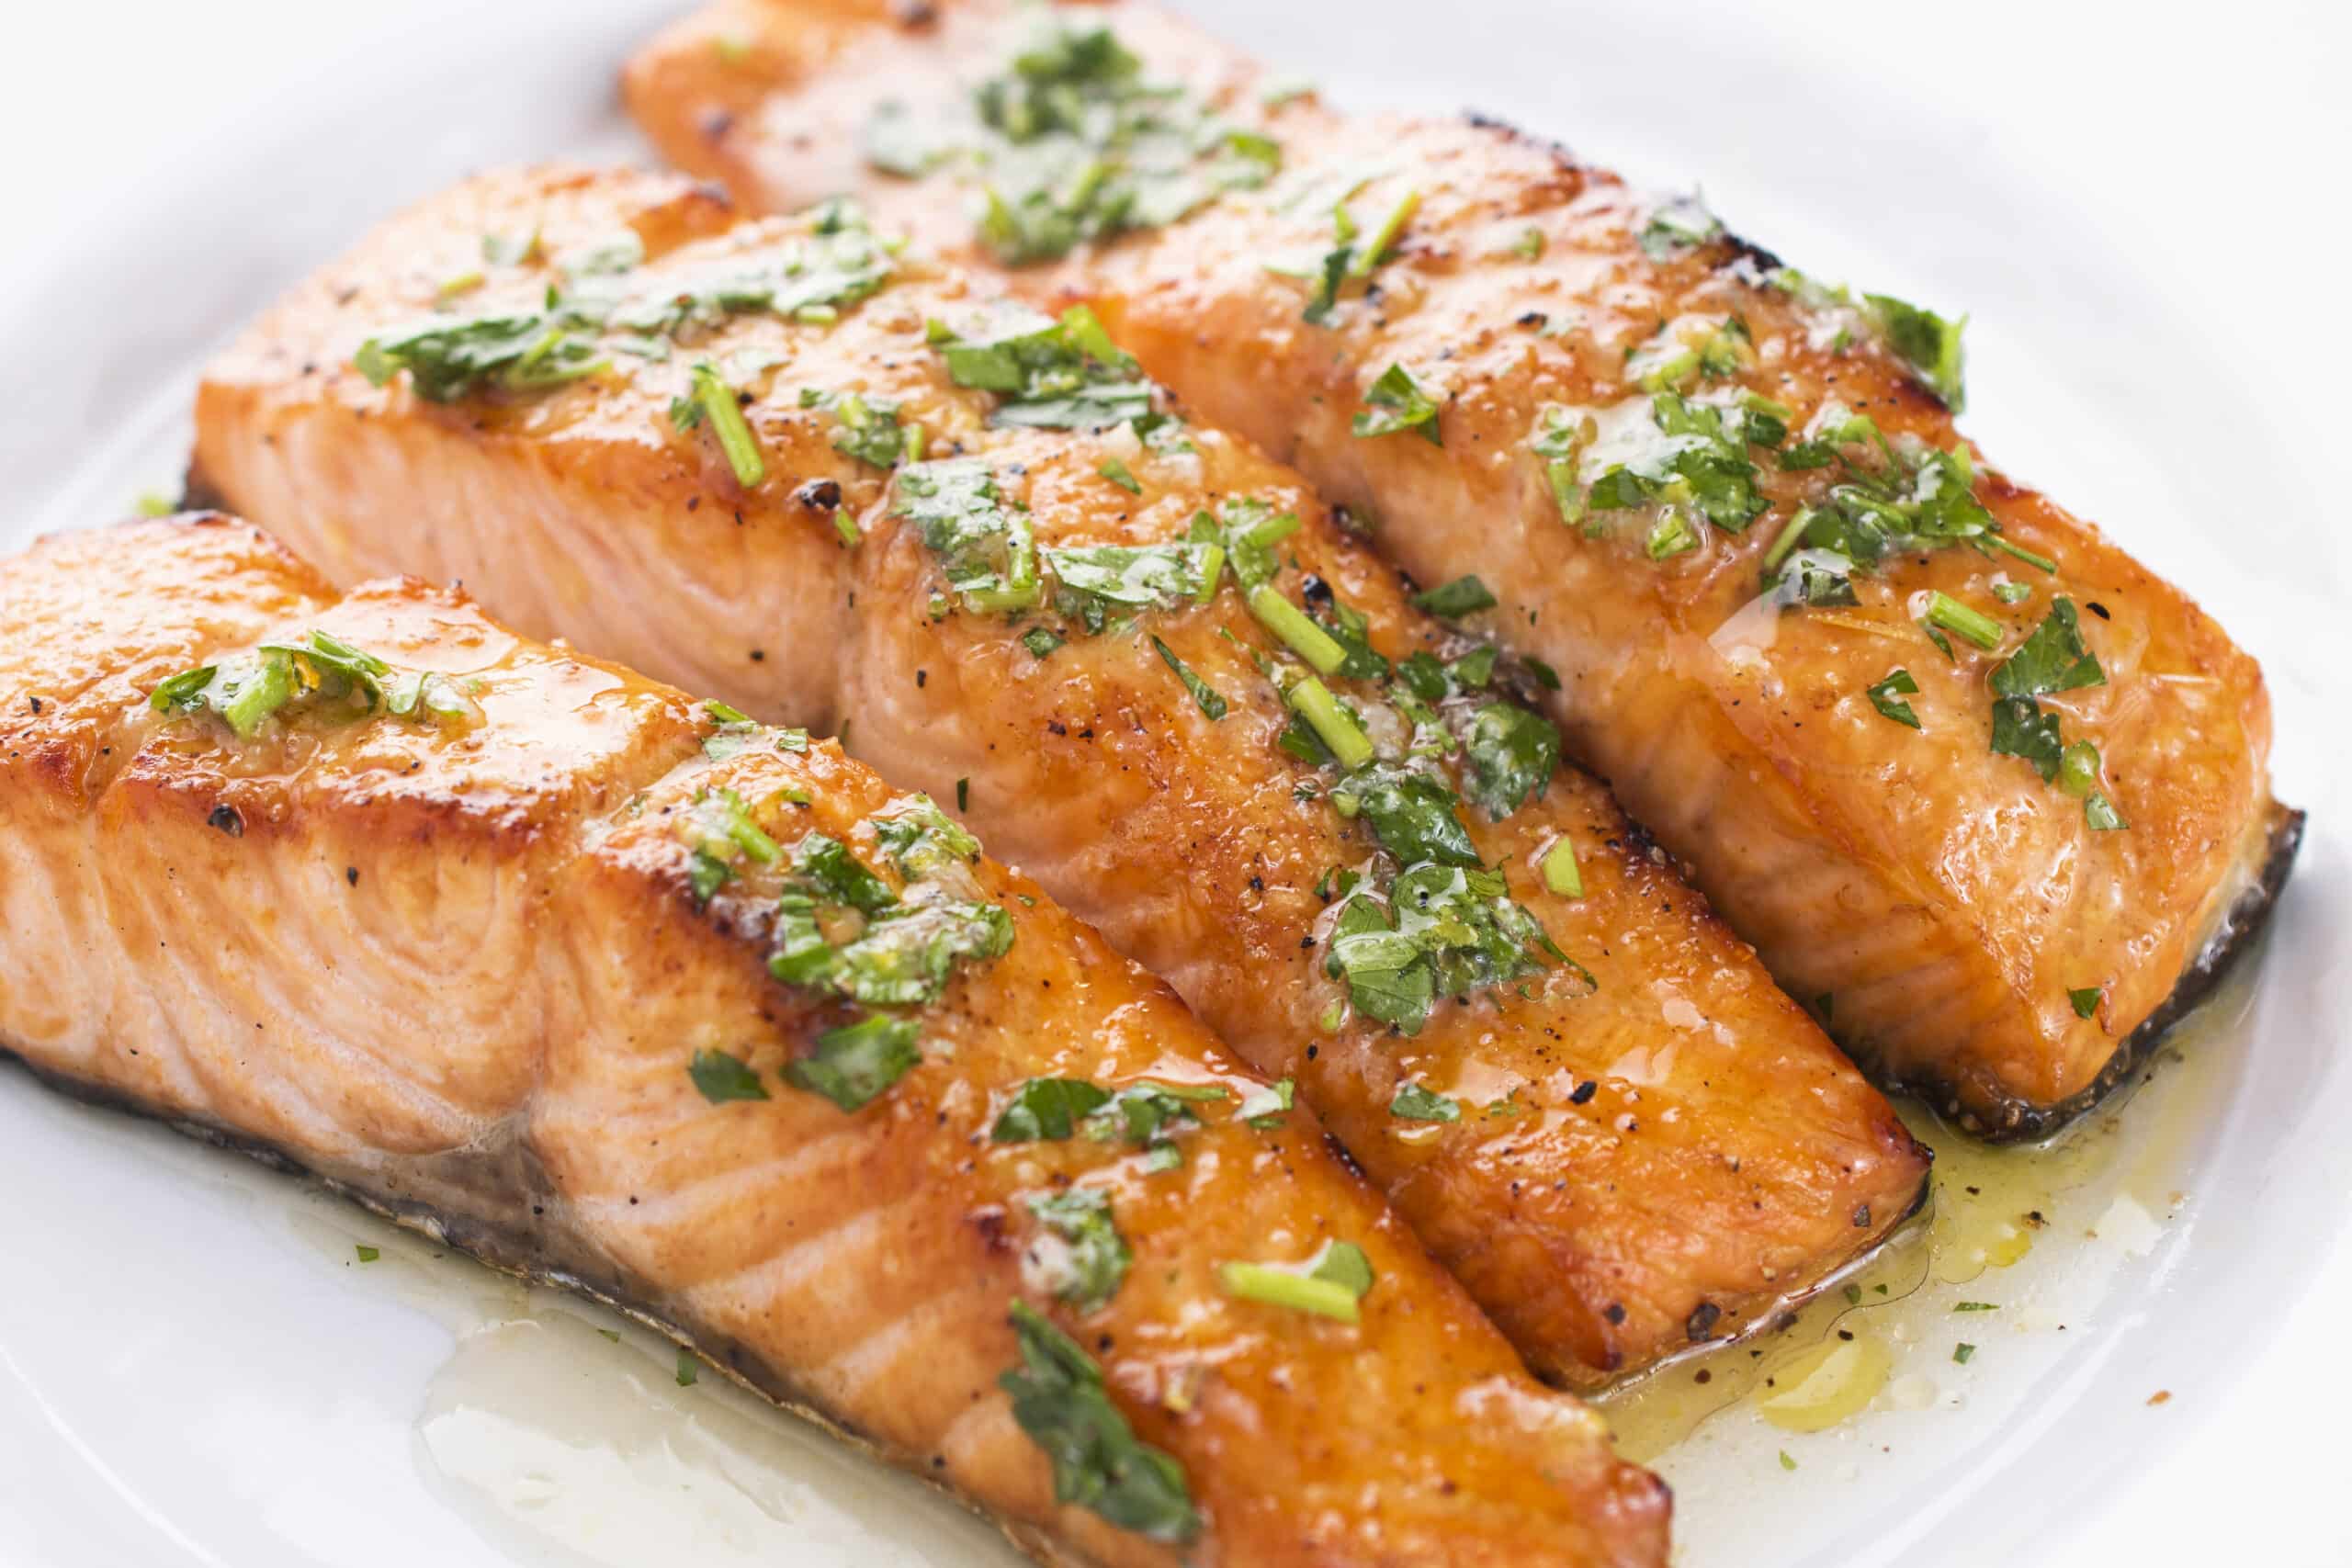 Grilled Salmon with Olive Oil and Herbs